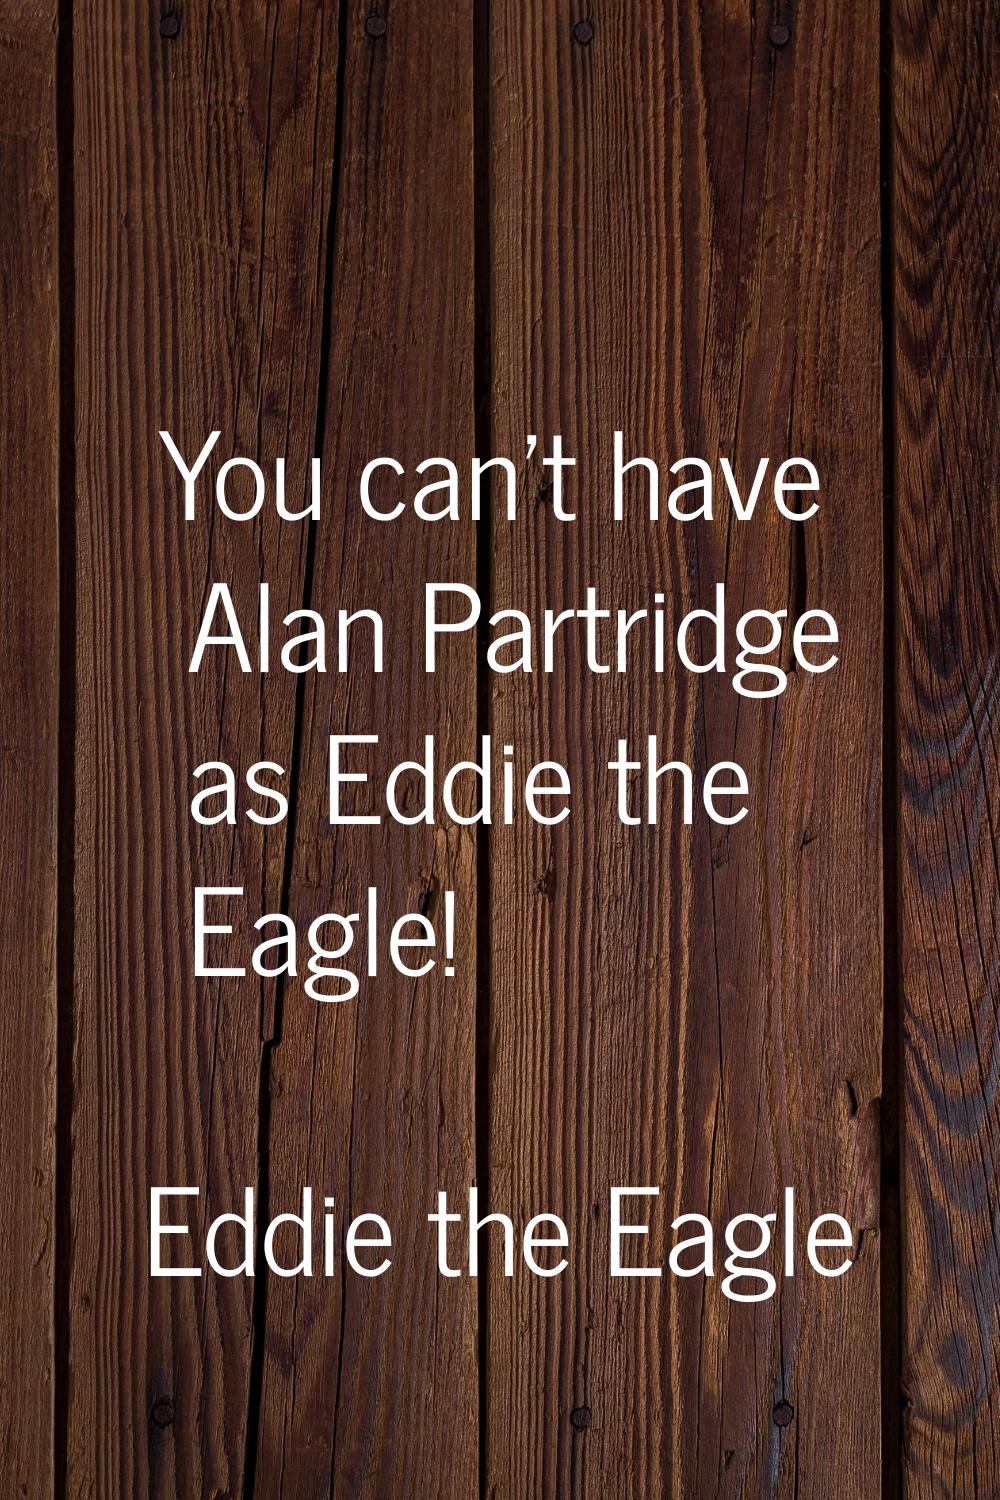 You can't have Alan Partridge as Eddie the Eagle!